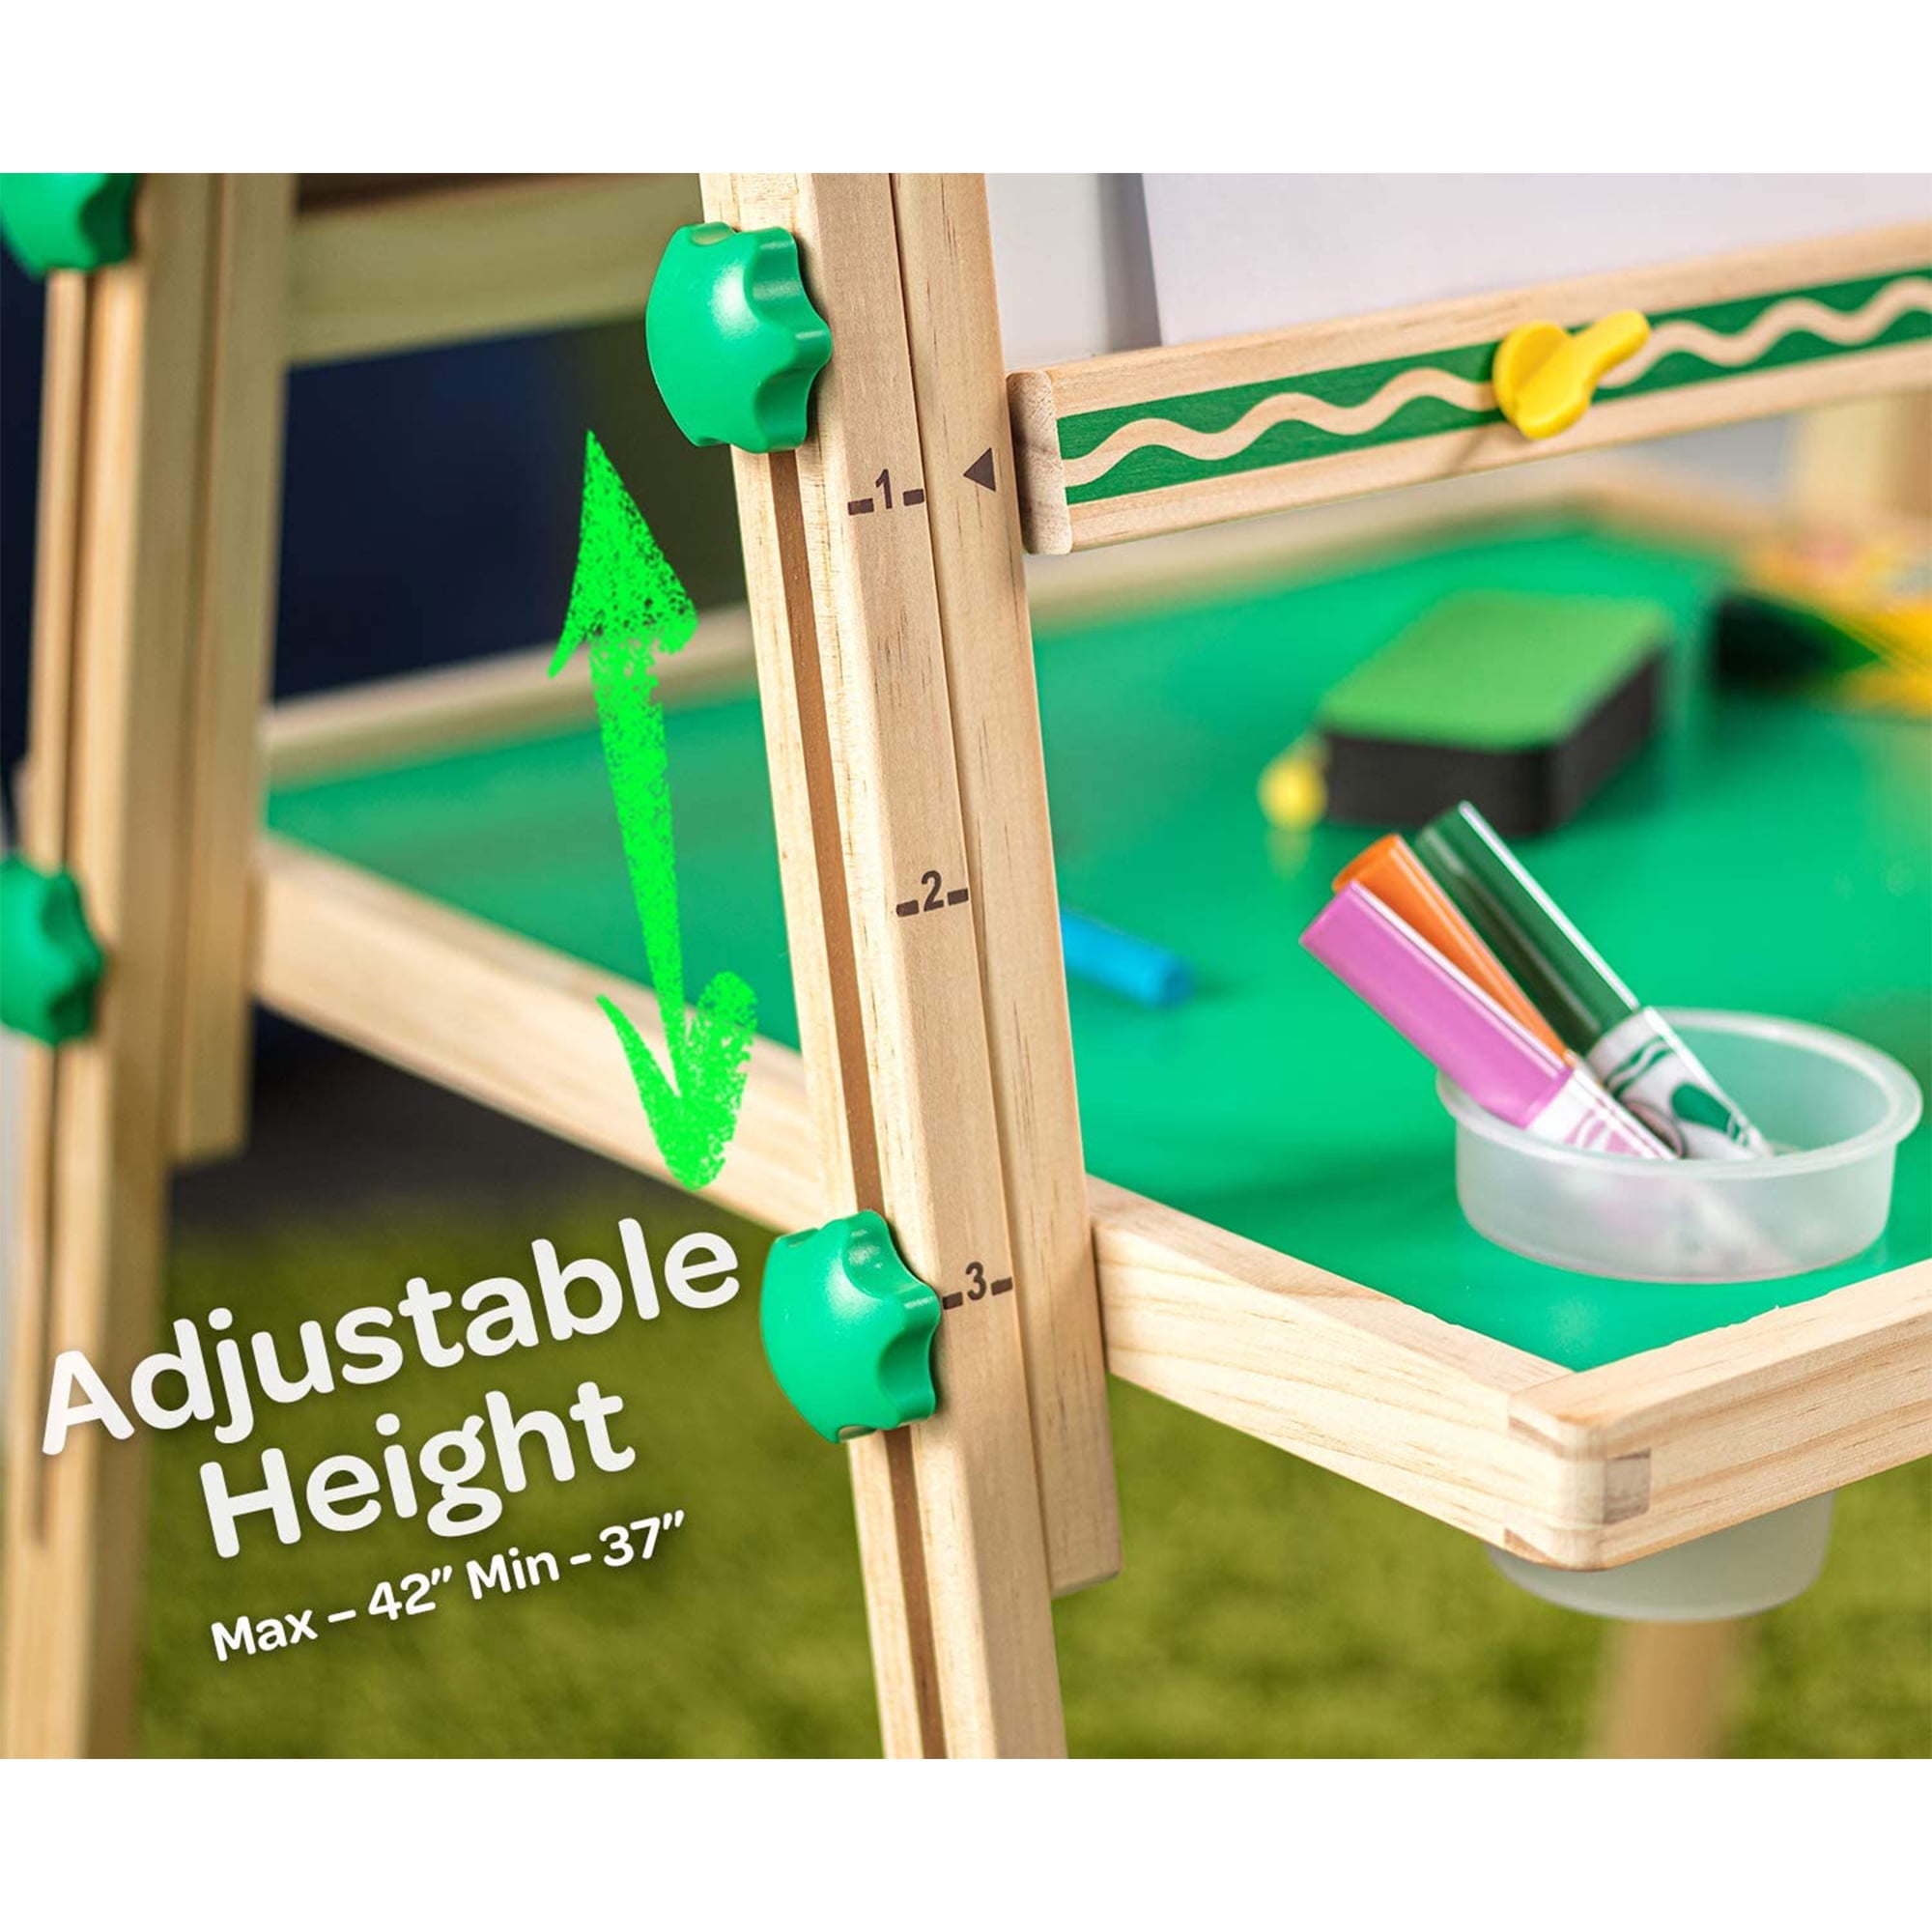 Crayola Kids Dual Sided Wooden Art Easel with Chalkboard and Dry Erase  Supplies, 1 Piece - Kroger